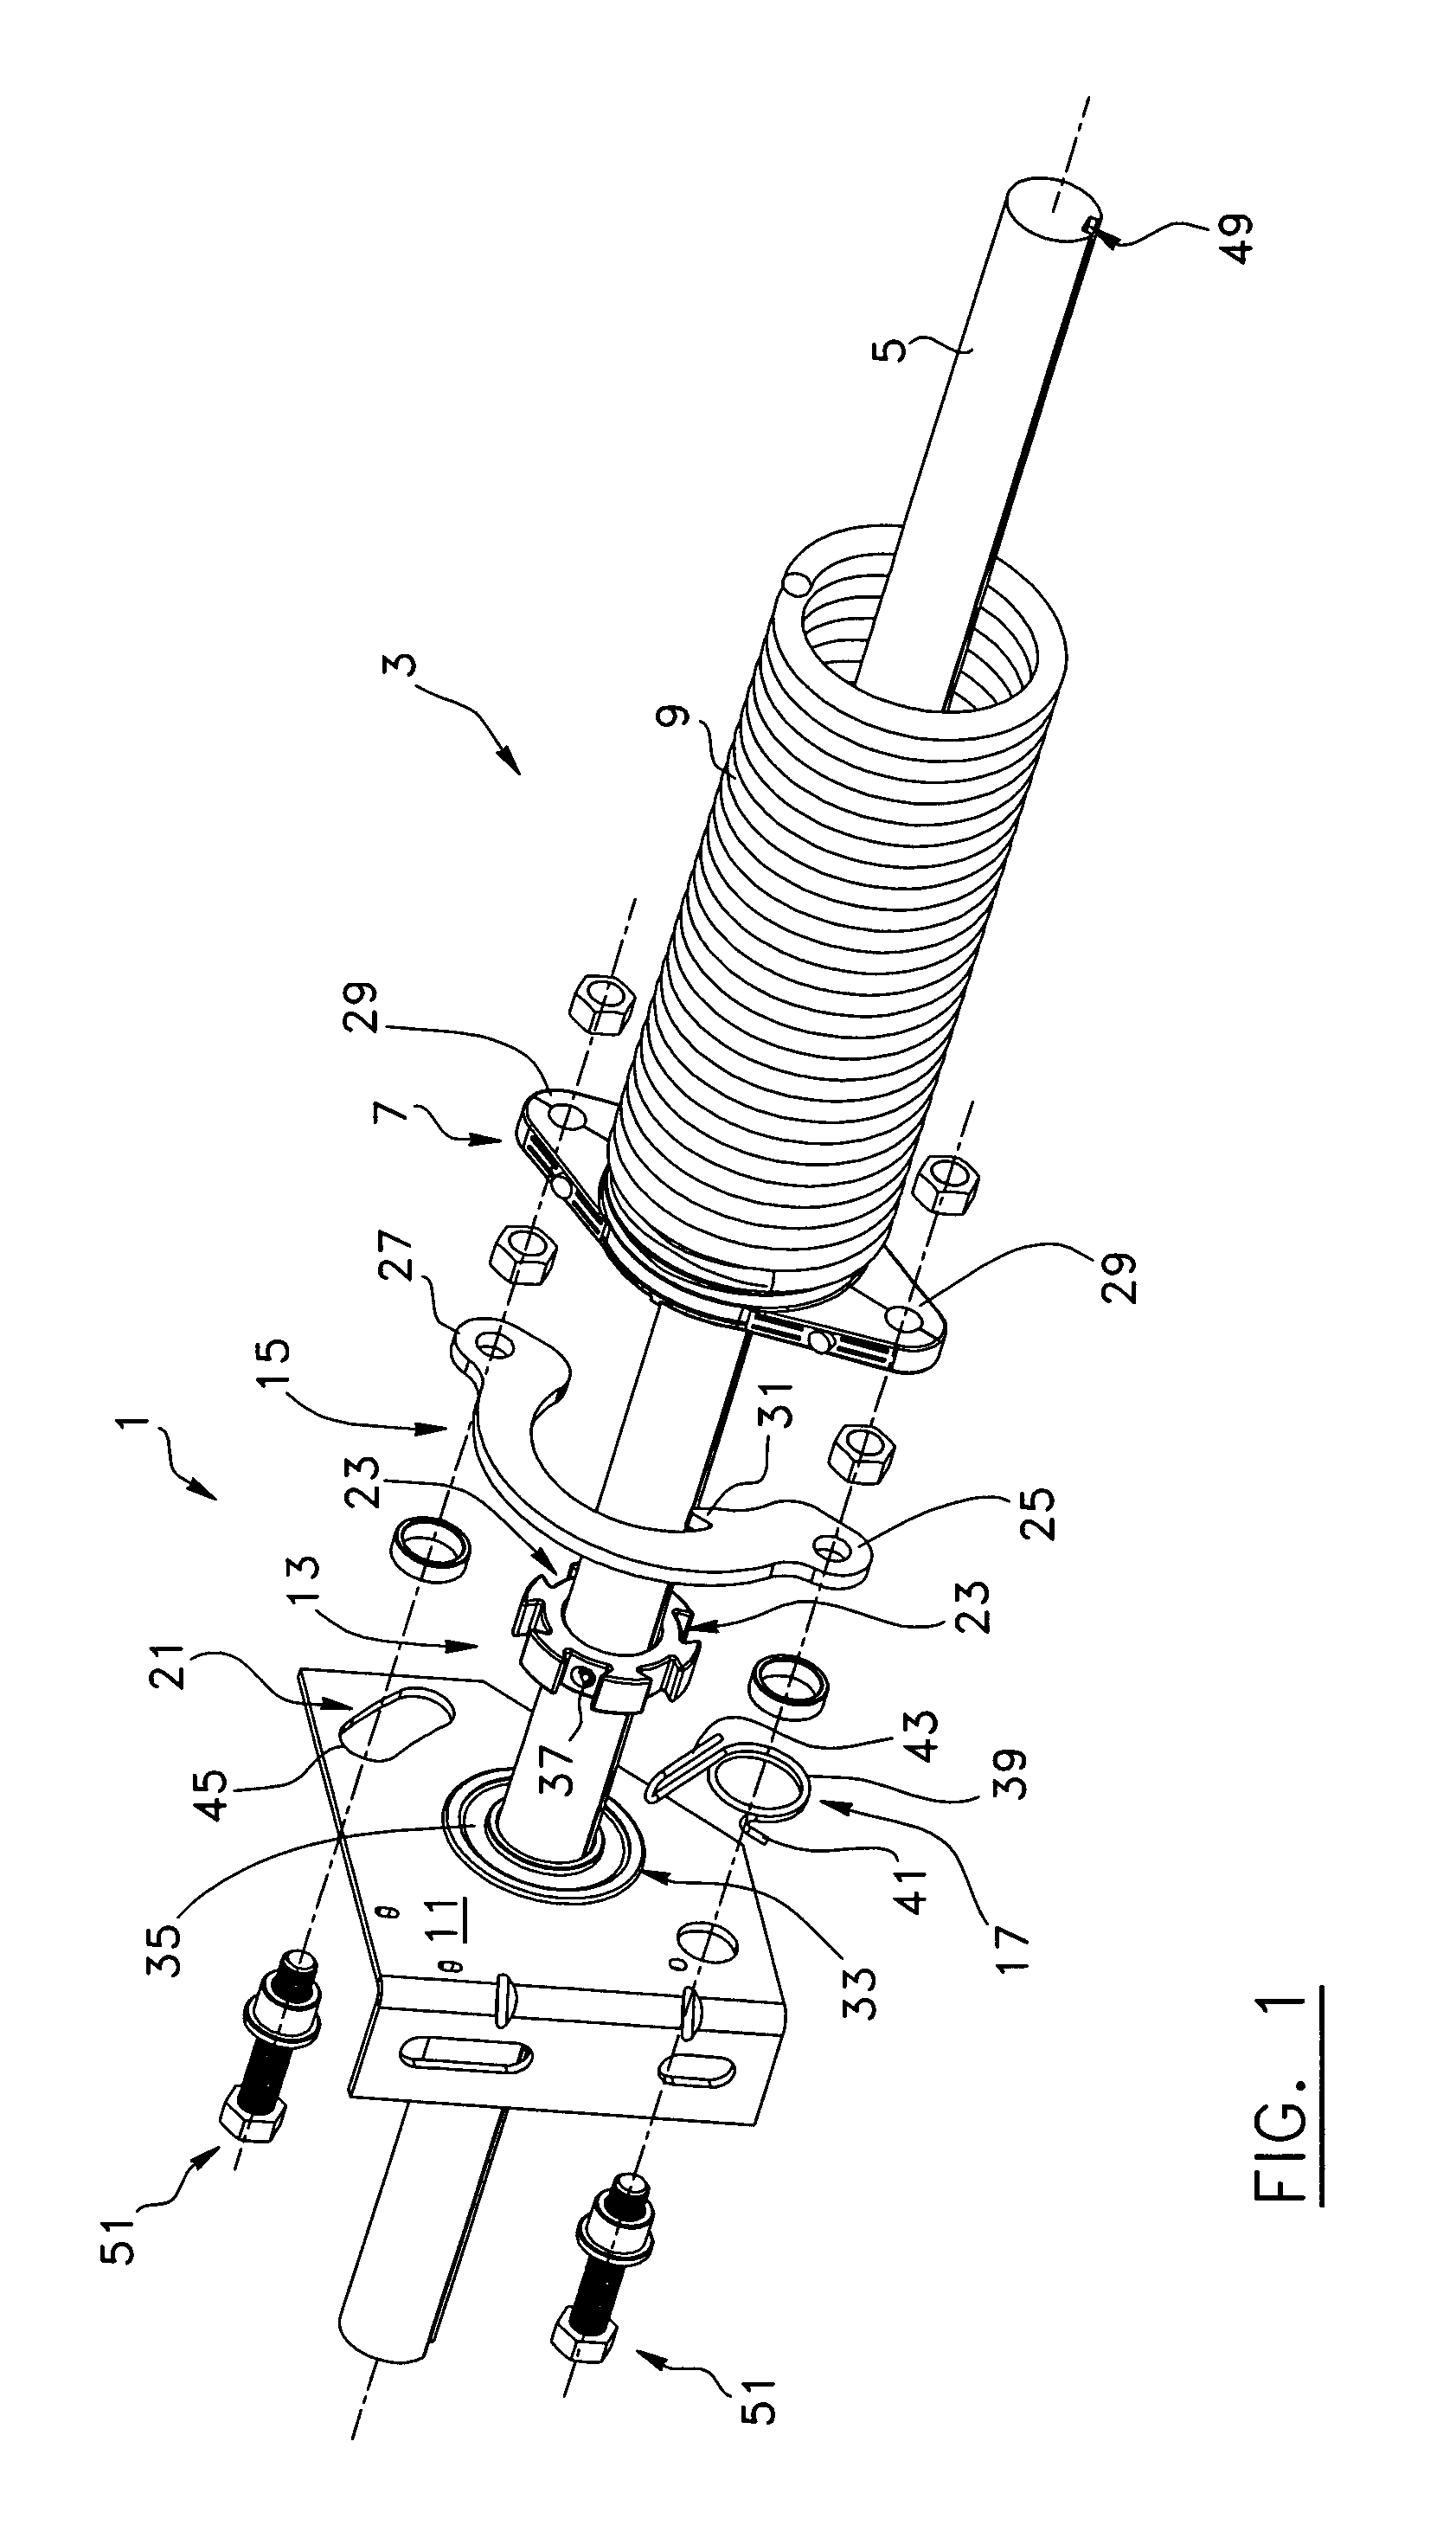 Braking device for garage doors and the like